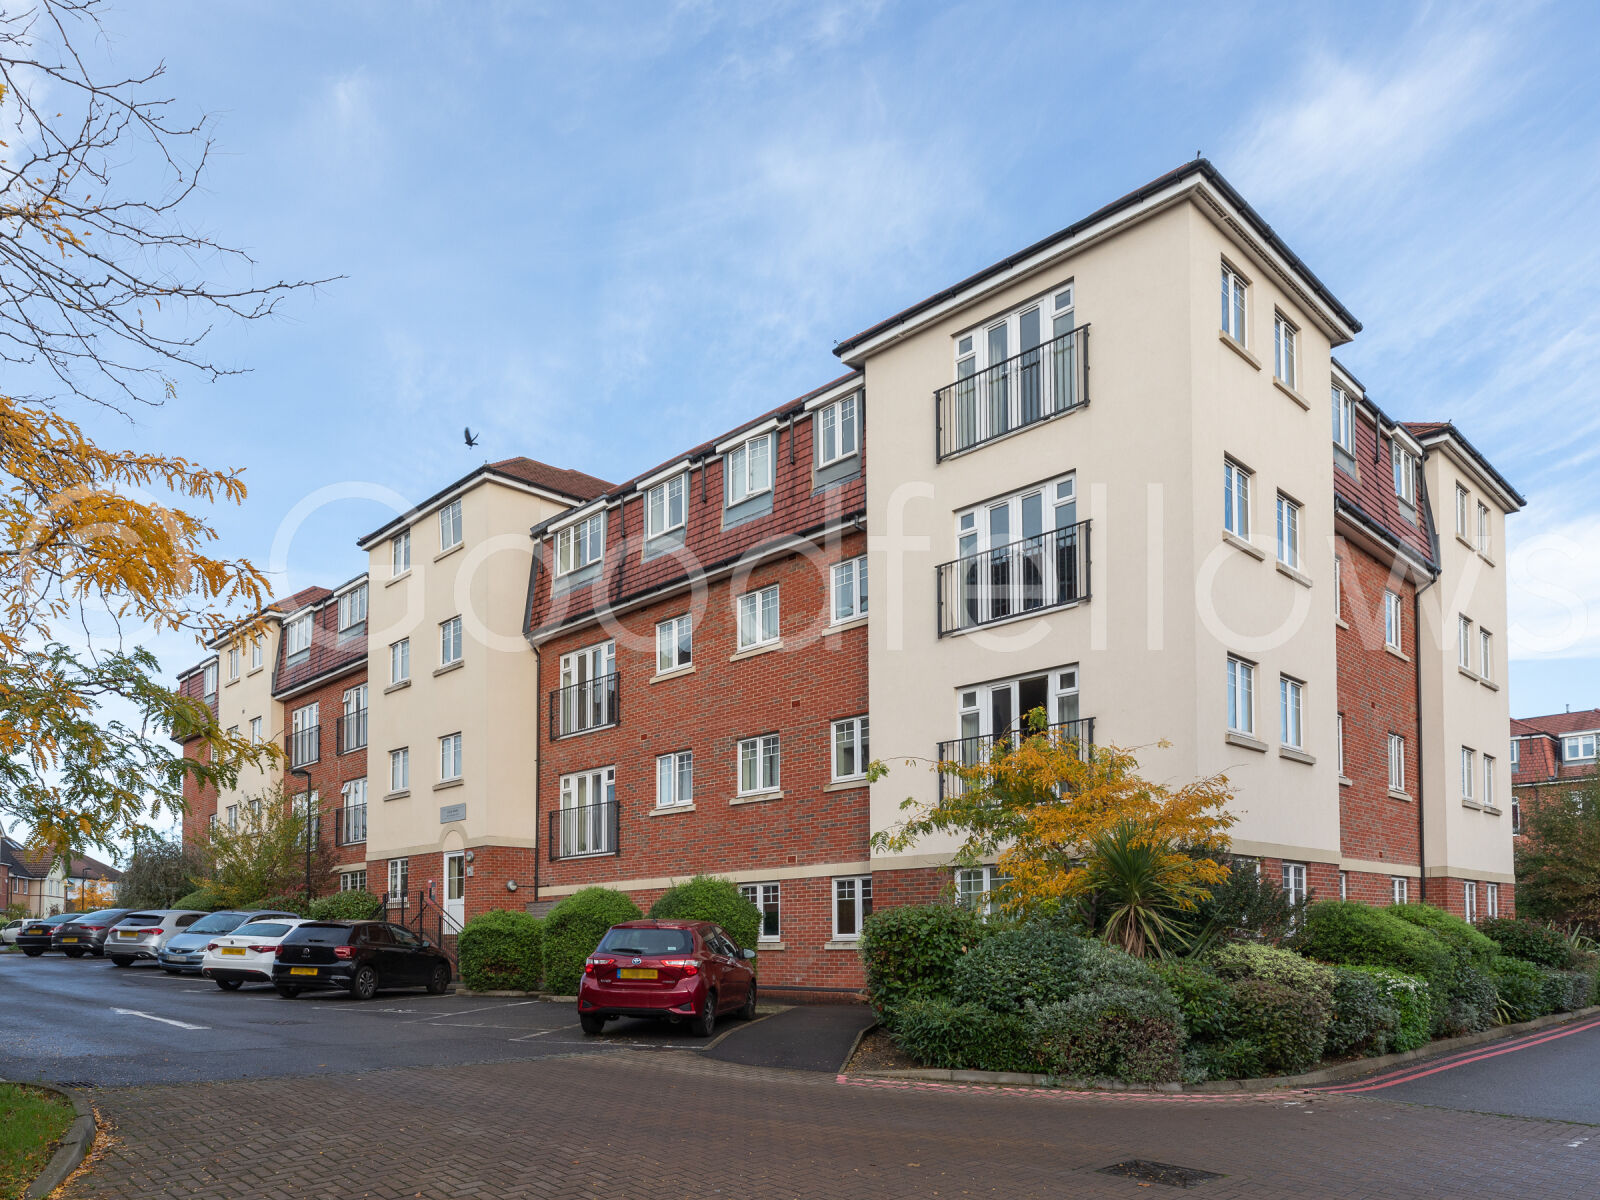 1 bedroom  flat to rent, Available now Schoolgate Drive, Morden, SM4, main image